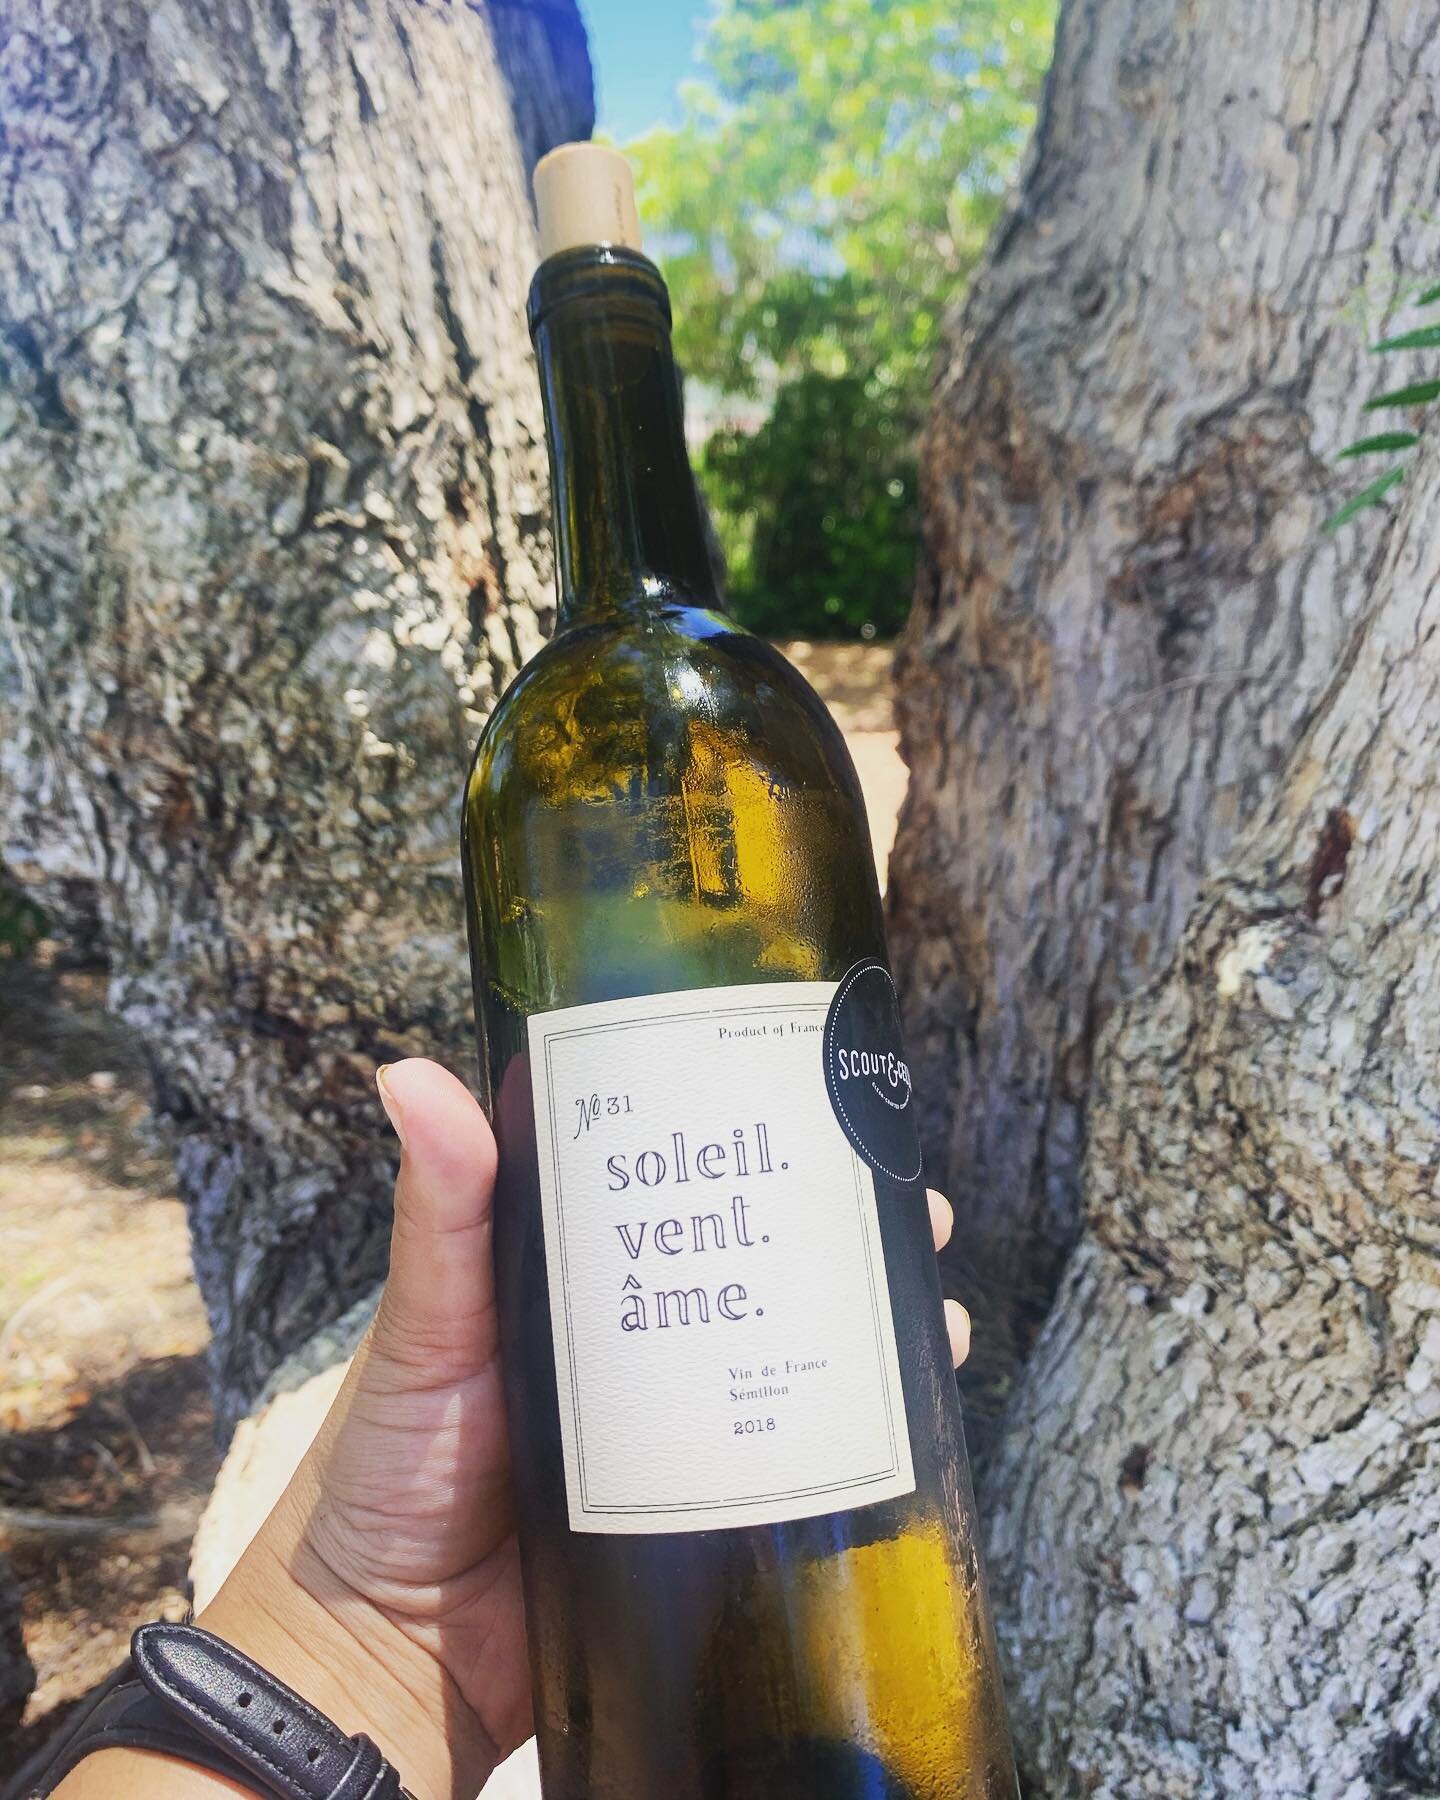 2018 Soleil. Vent. Âme. Sémillon, Vin de France
Aka Sun. Wind. Soul. 

Vegan, Organic, Unfiltered, Clean Crafted.

Let&rsquo;s talk about Sémillon! 
This grape is a classic, it is full bodied like a Chardonnay but gives you more of a new world Sau